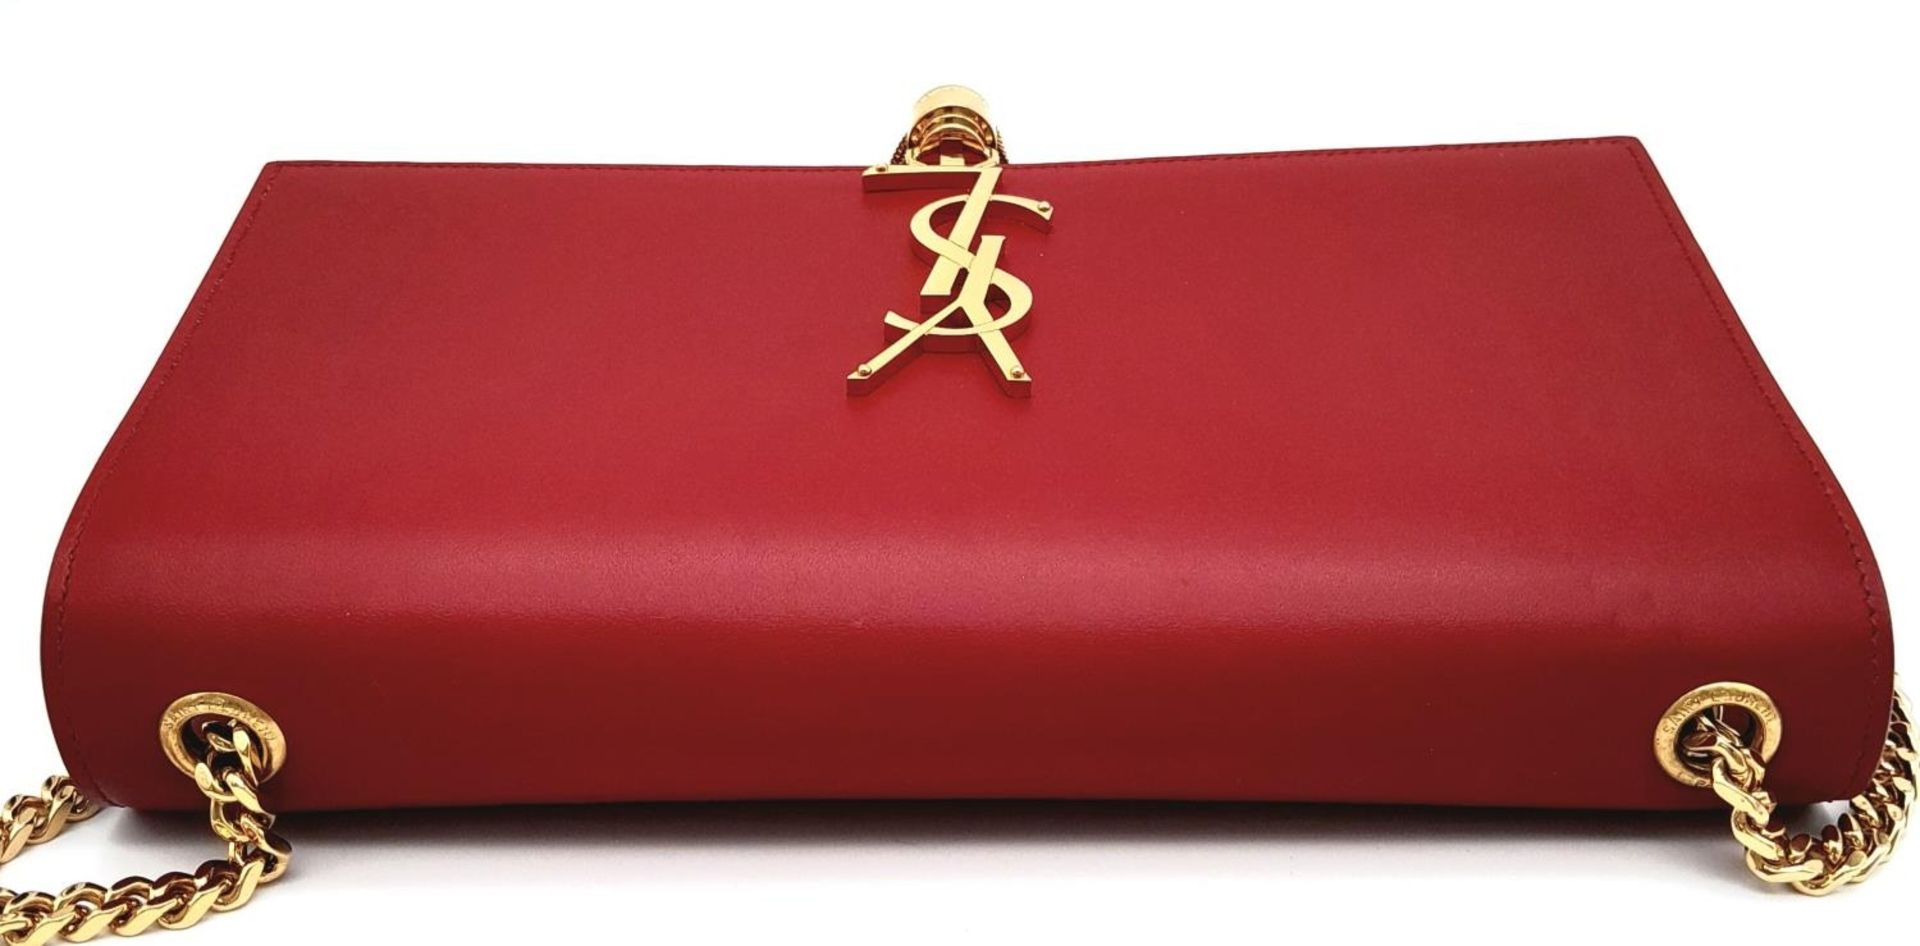 A YSL Red Kate Tassel Crossbody Bag. Leather exterior with gold-toned hardware, the iconic YSL logo, - Bild 3 aus 12